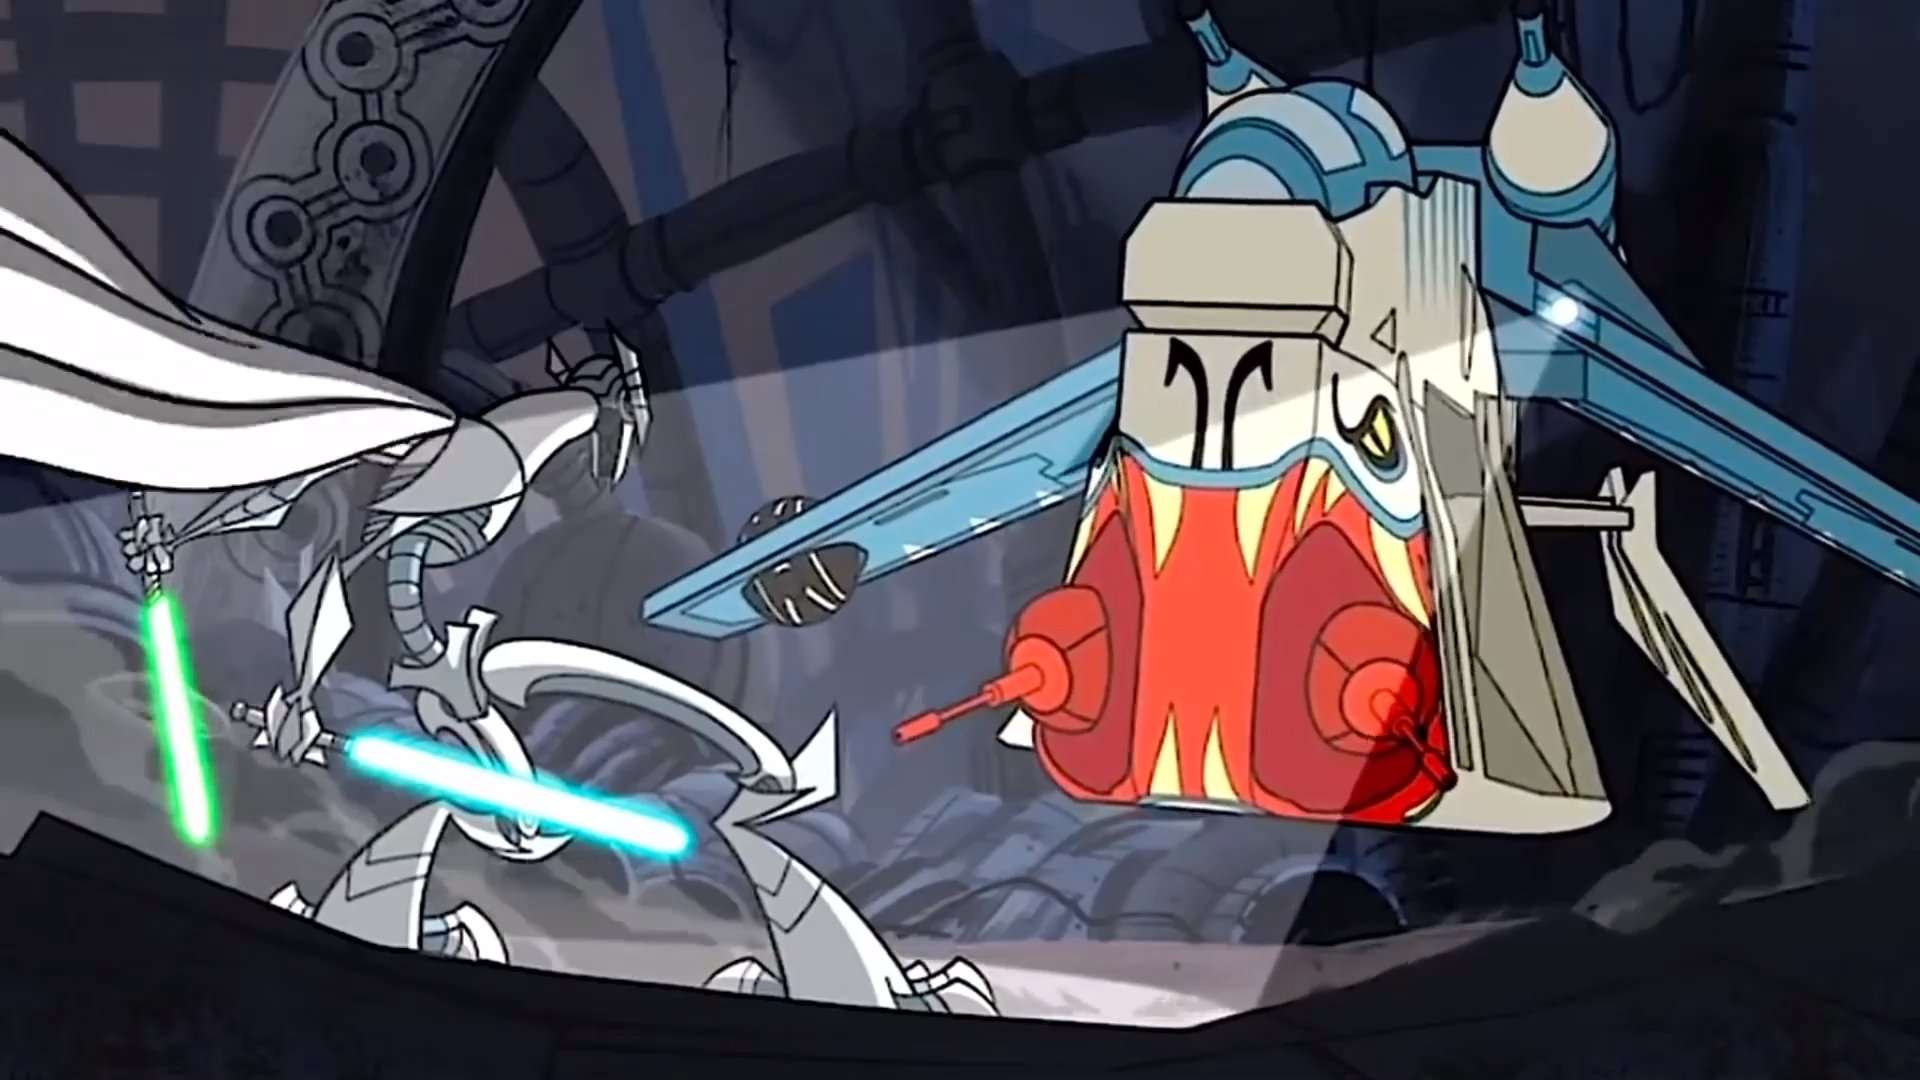 image for 15 years ago today General Grievous made his fearsome first appearance in Tartakovsky's Clone Wars when Chapter 20 aired [Legends] : StarWars